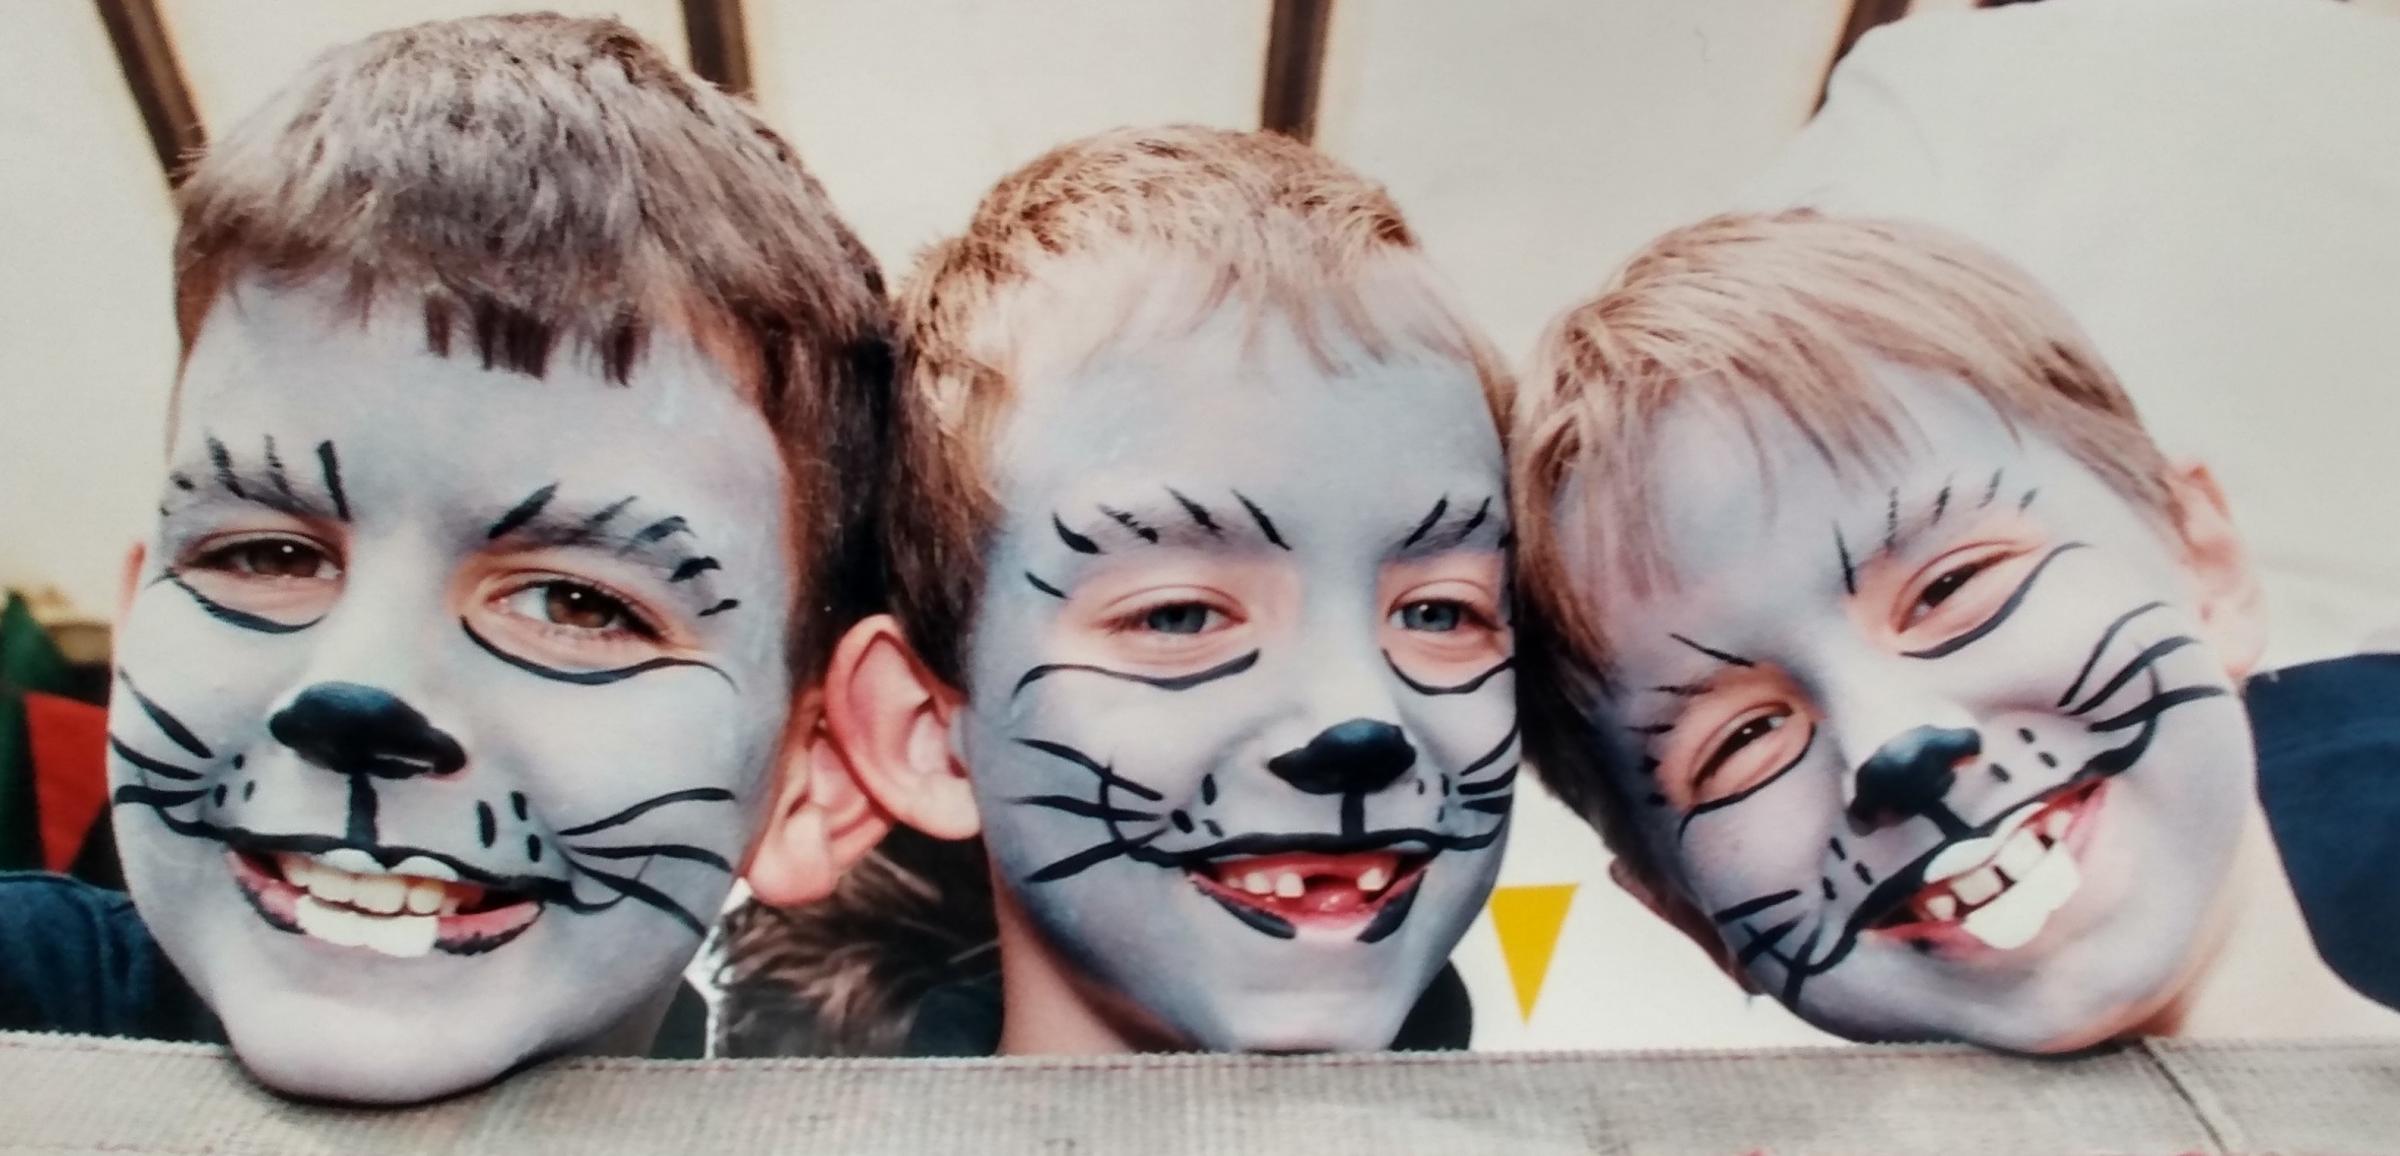 May 1998 and there was animal magic in the form of Matthew Webb, David Hurst and Alistair McKenzie on board the Pinvin First School float at Pershore Carnival